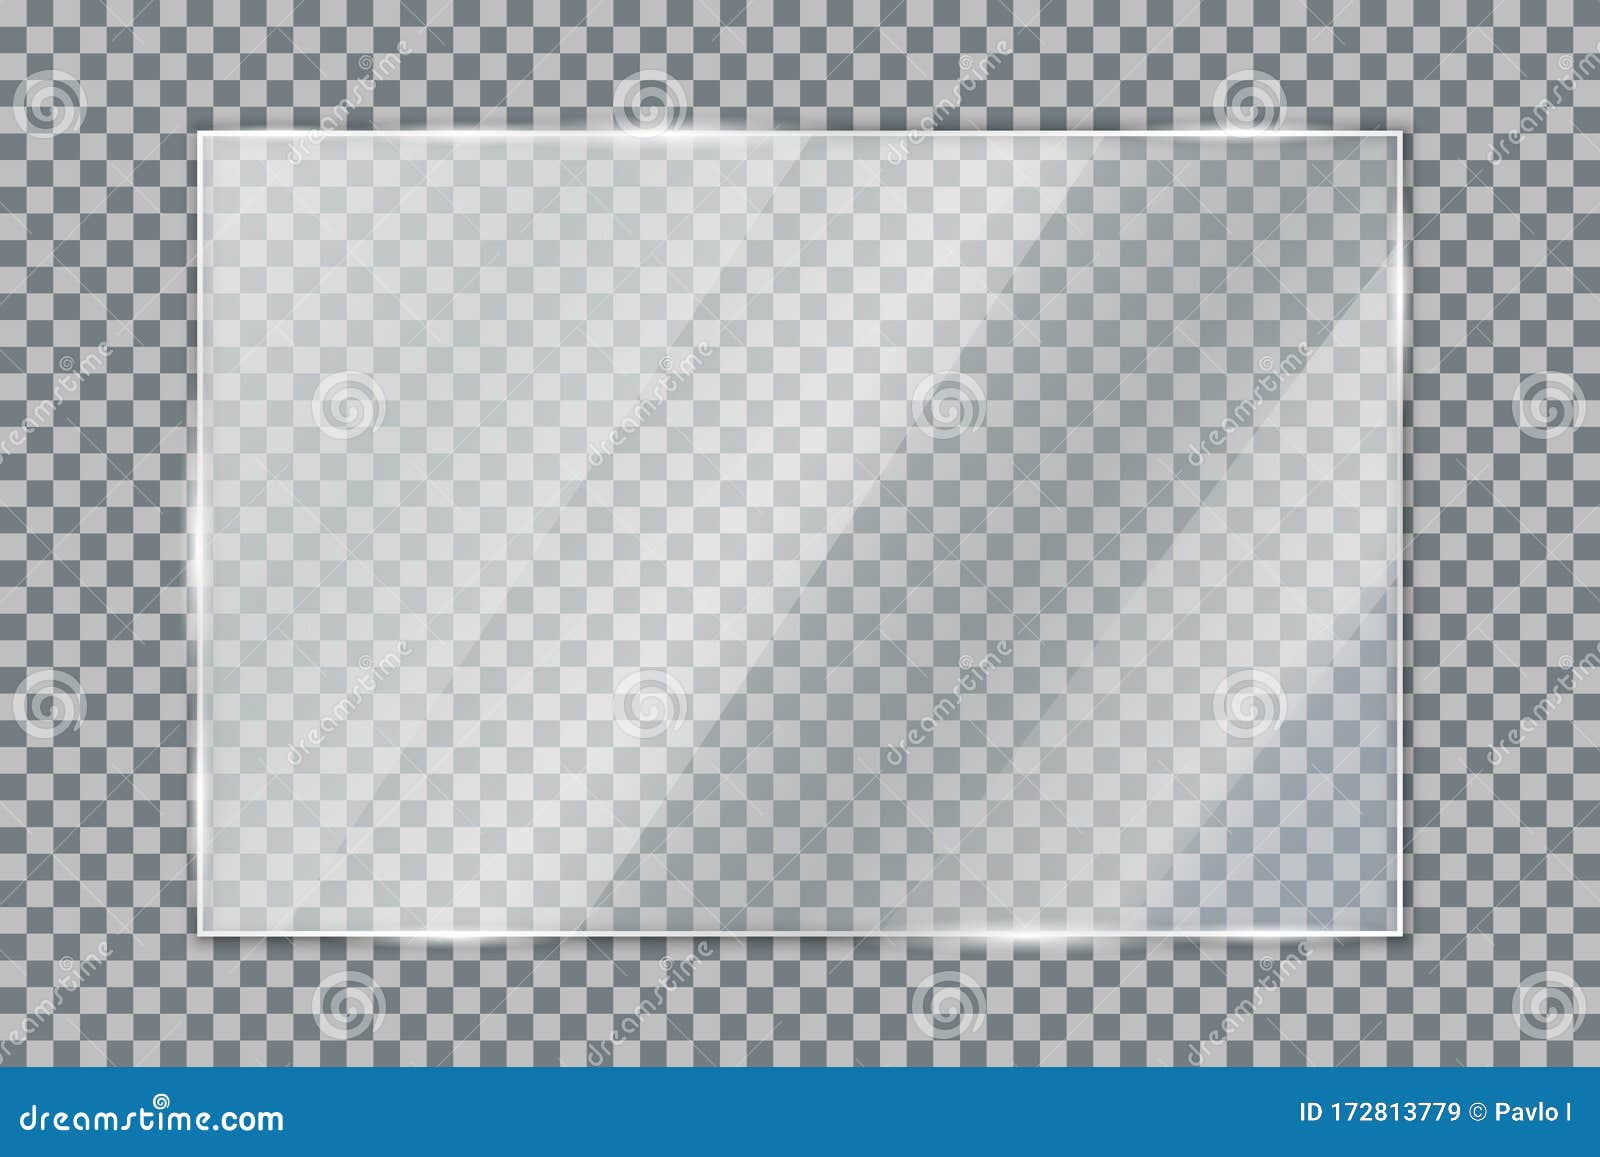 glass plate on transparent background, clear glass showcase, realistic window mockup, acrylic and glass texture with glares